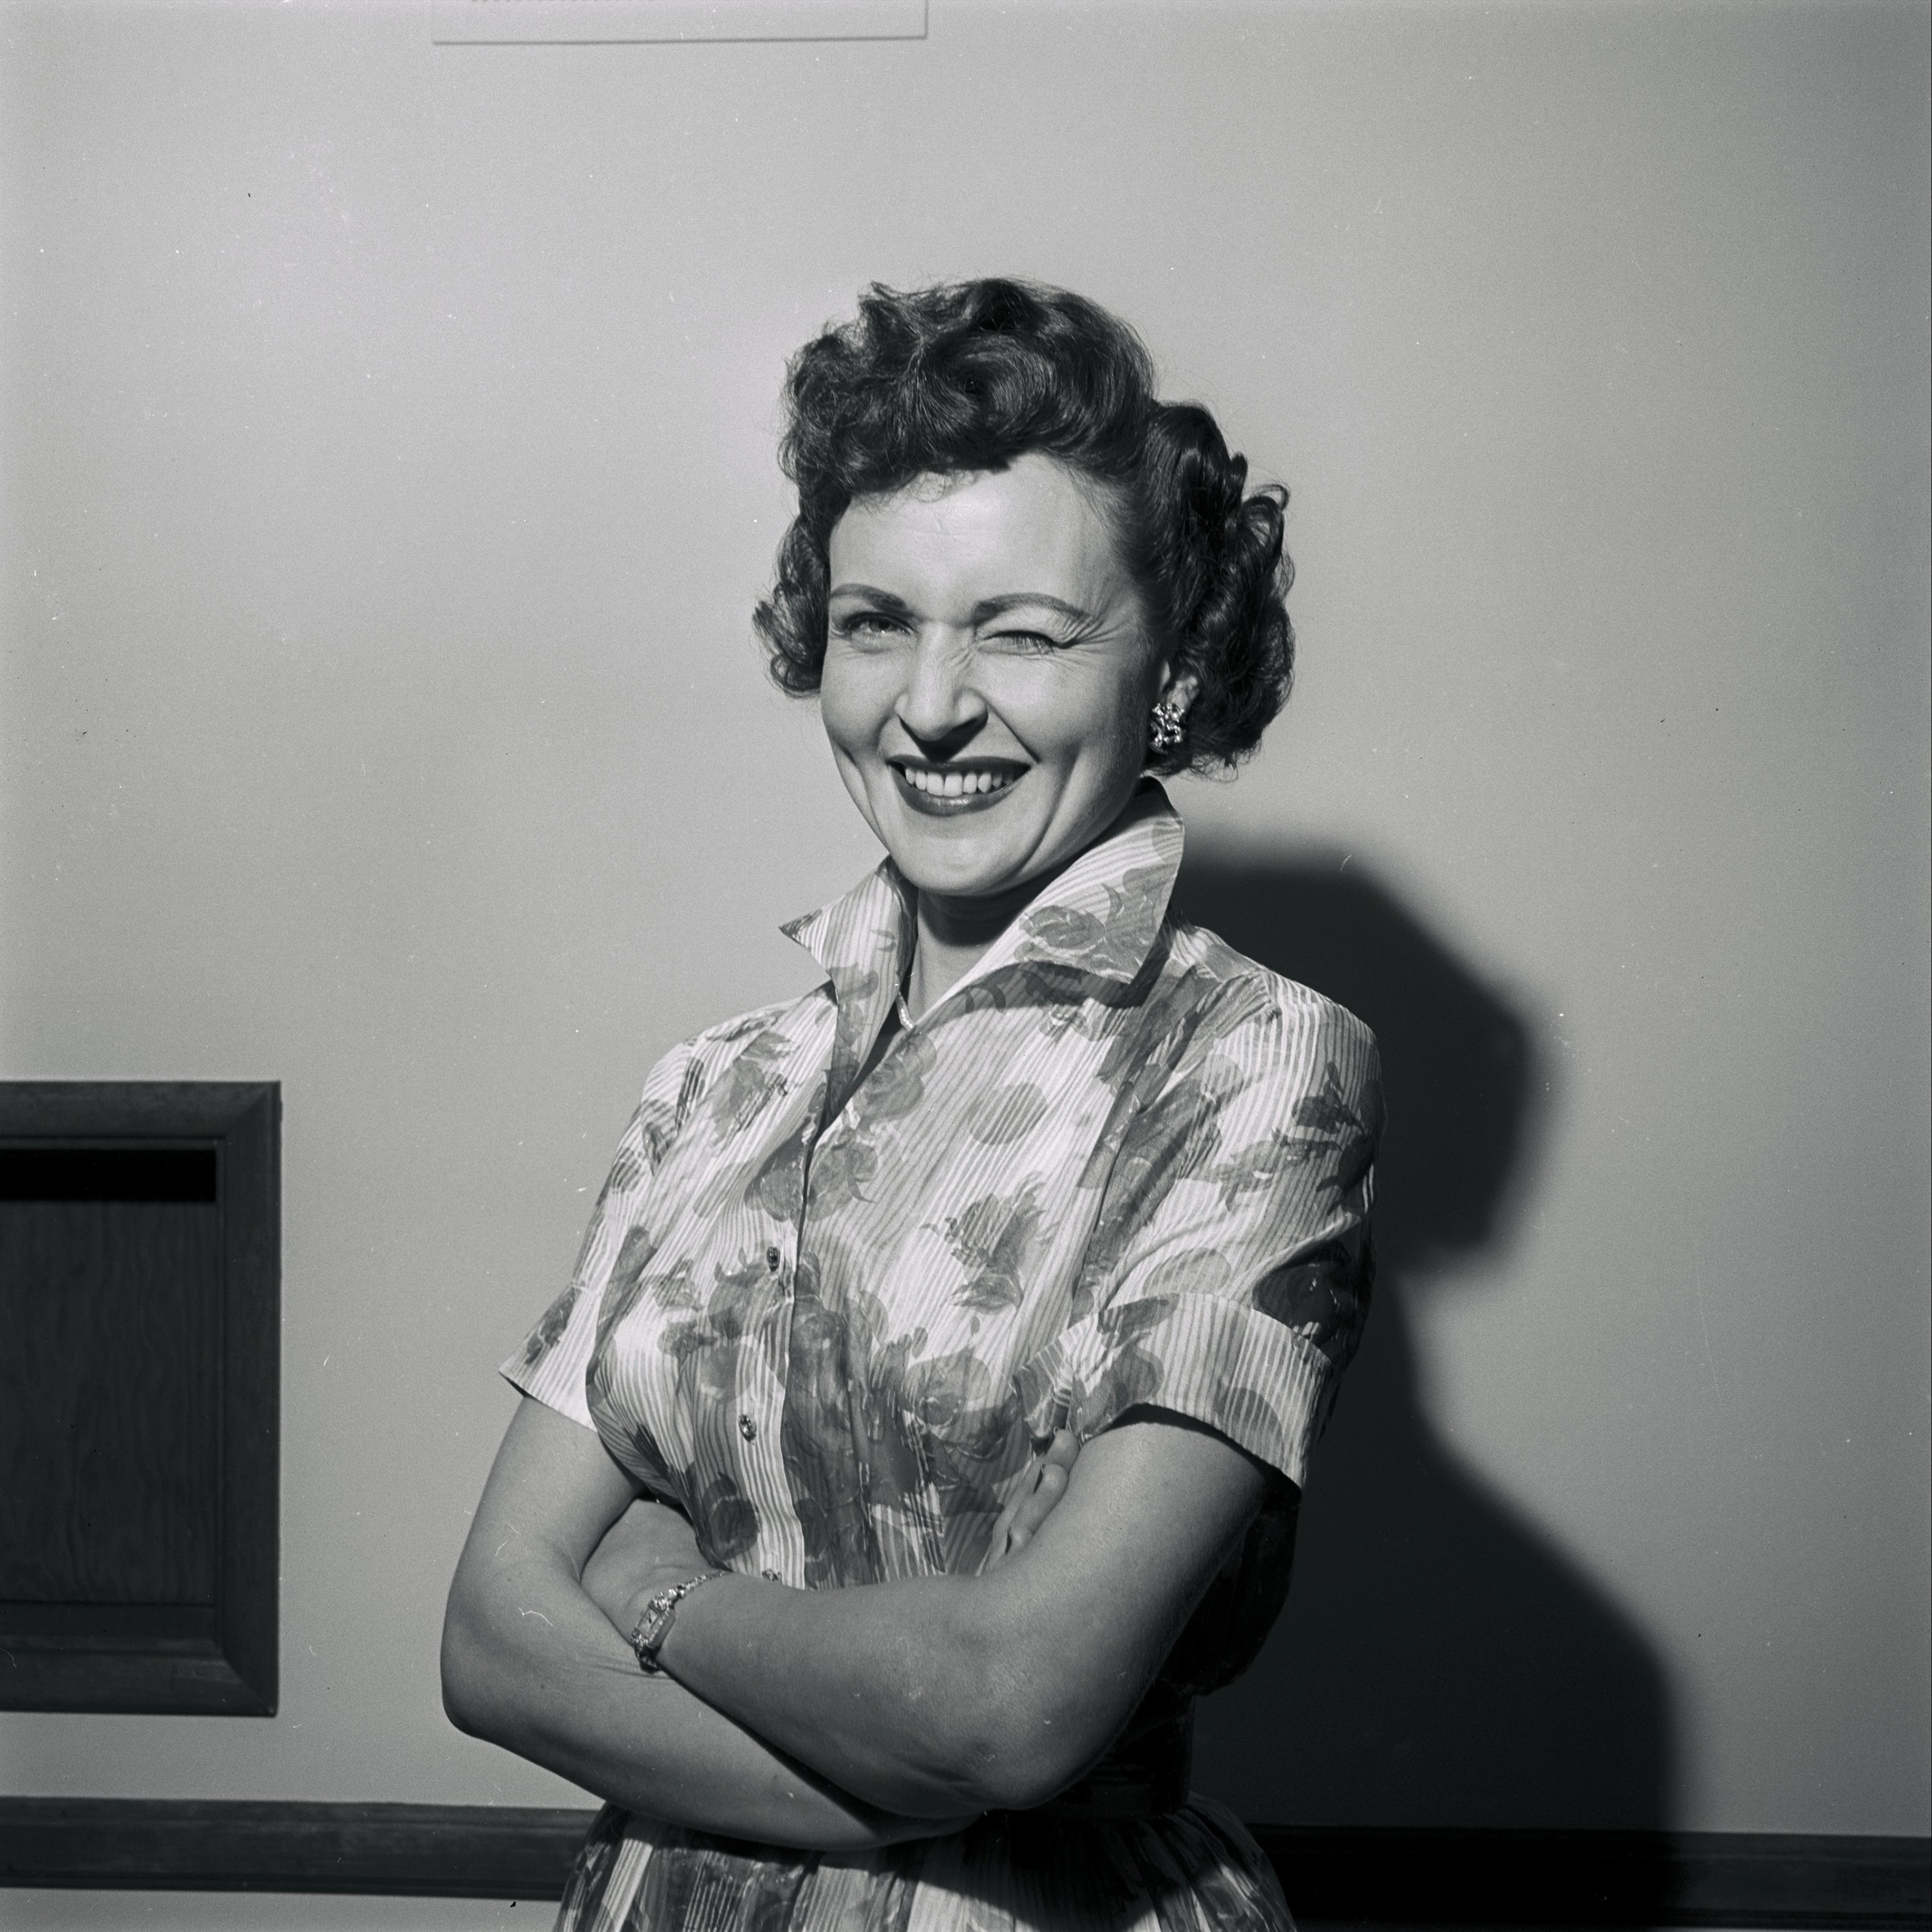 Betty winking with arms folded